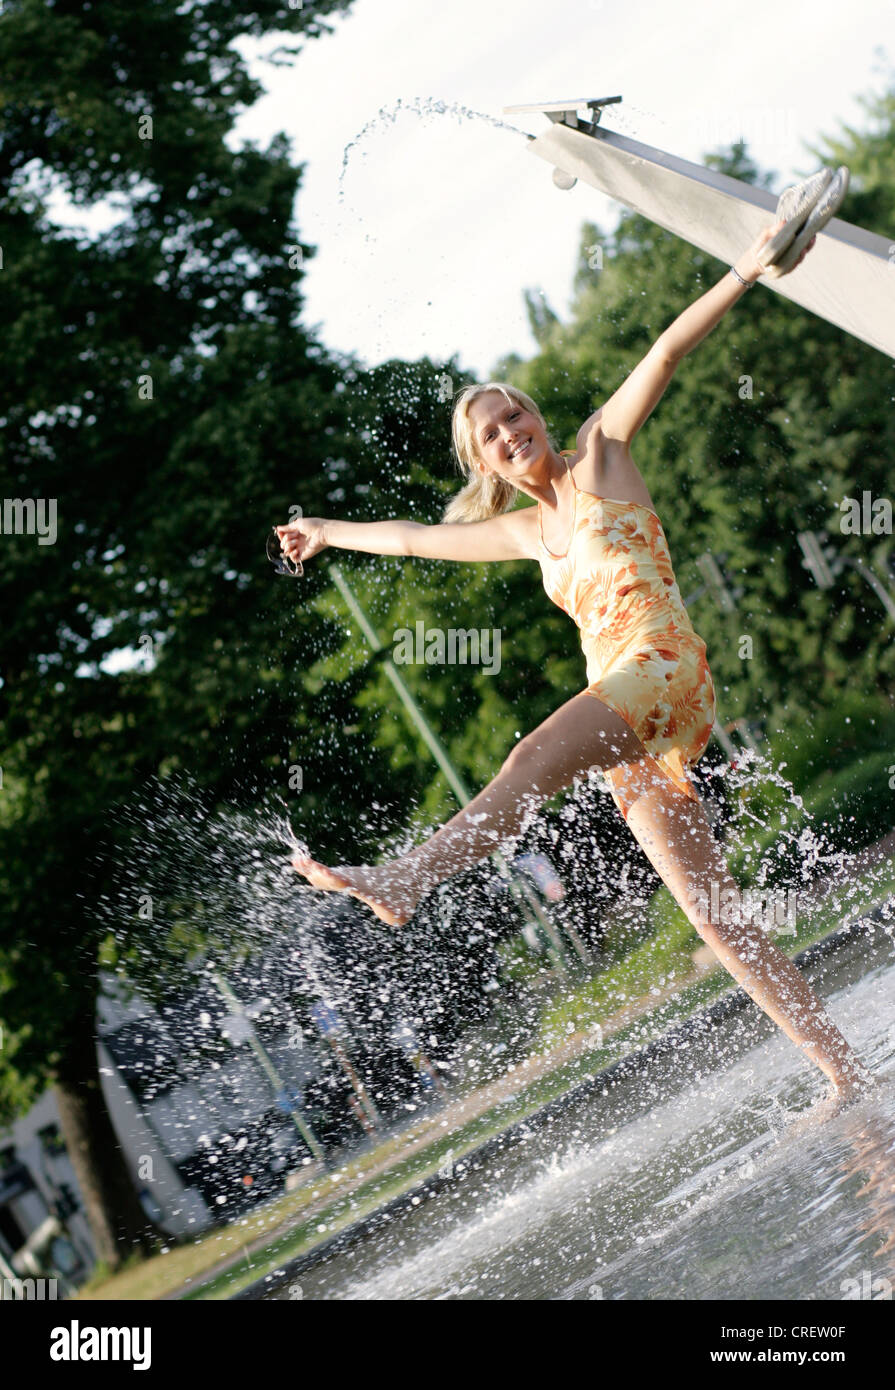 young blond woman in summer dress splashing with water of a fountain, Germany Stock Photo